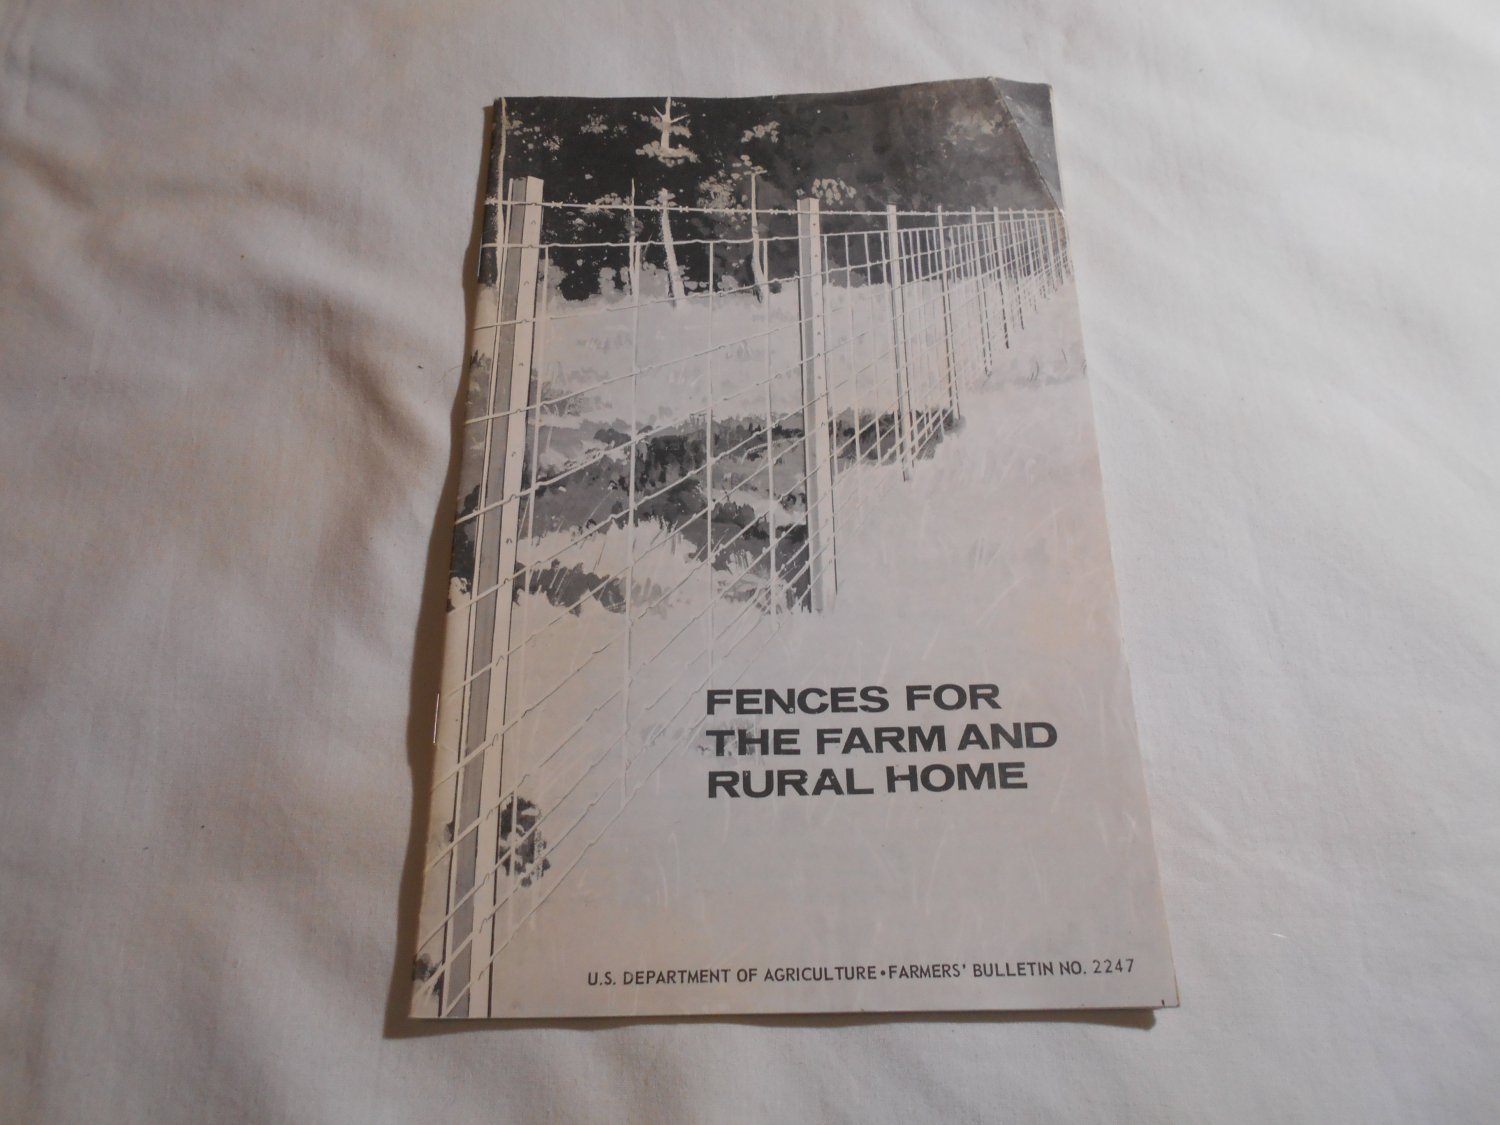 Fences for the Farm and Rural Home (1974) (B47) Farmers' Bulletin No. 2247